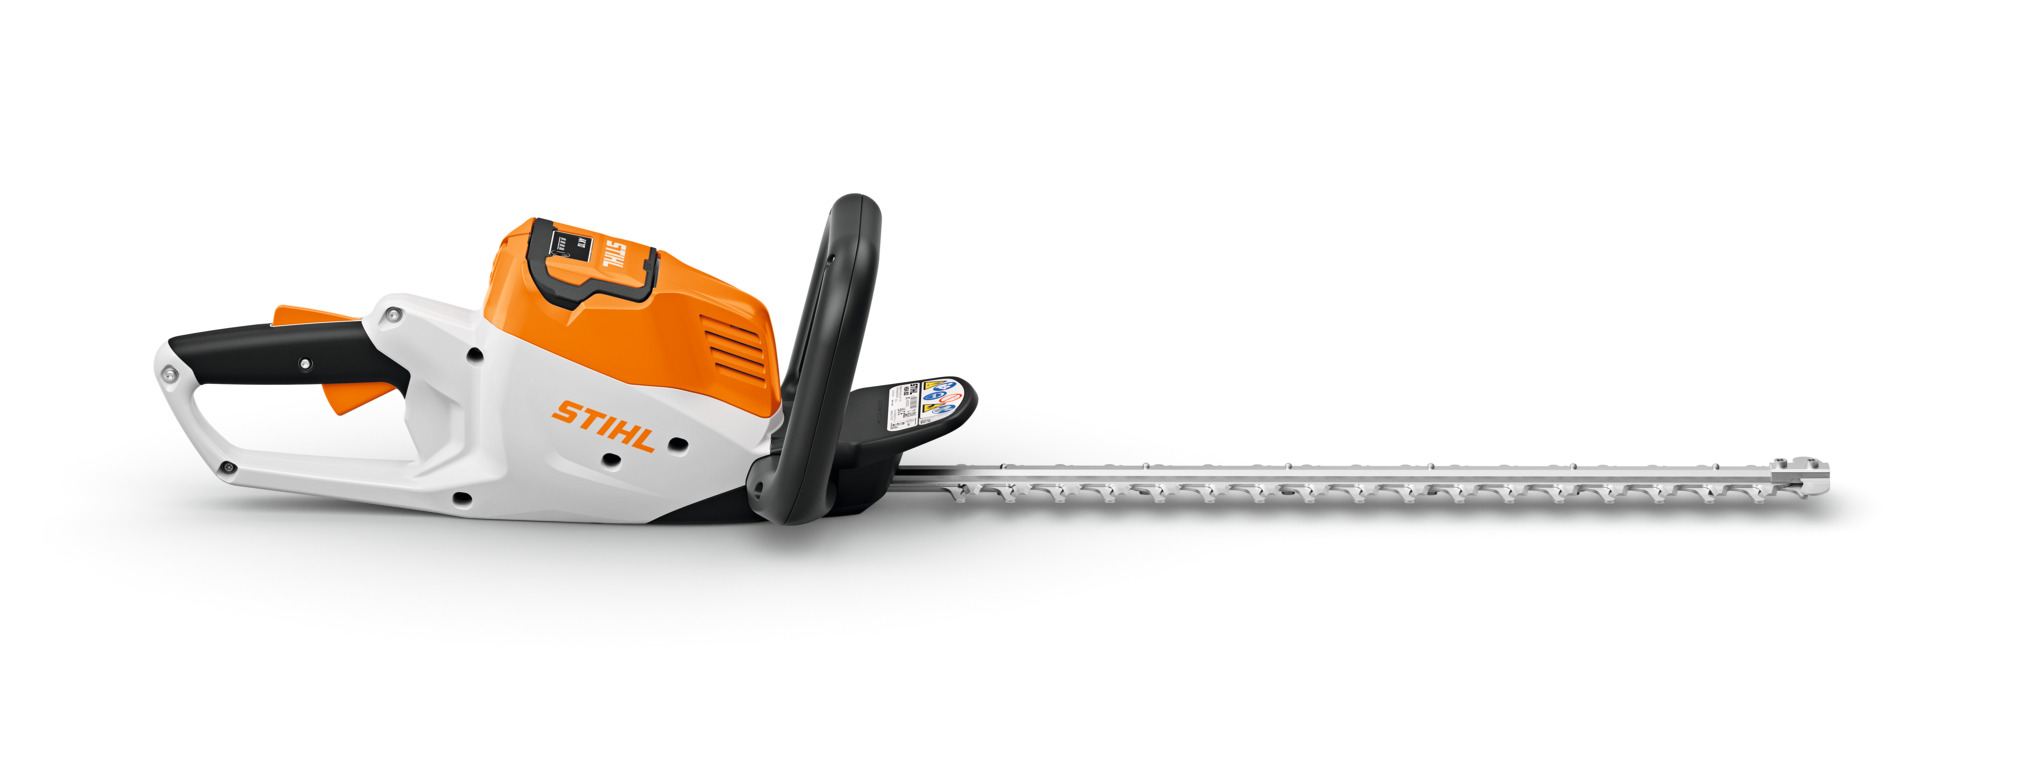 HSA 50 Battery Hedge Trimmer - AK System